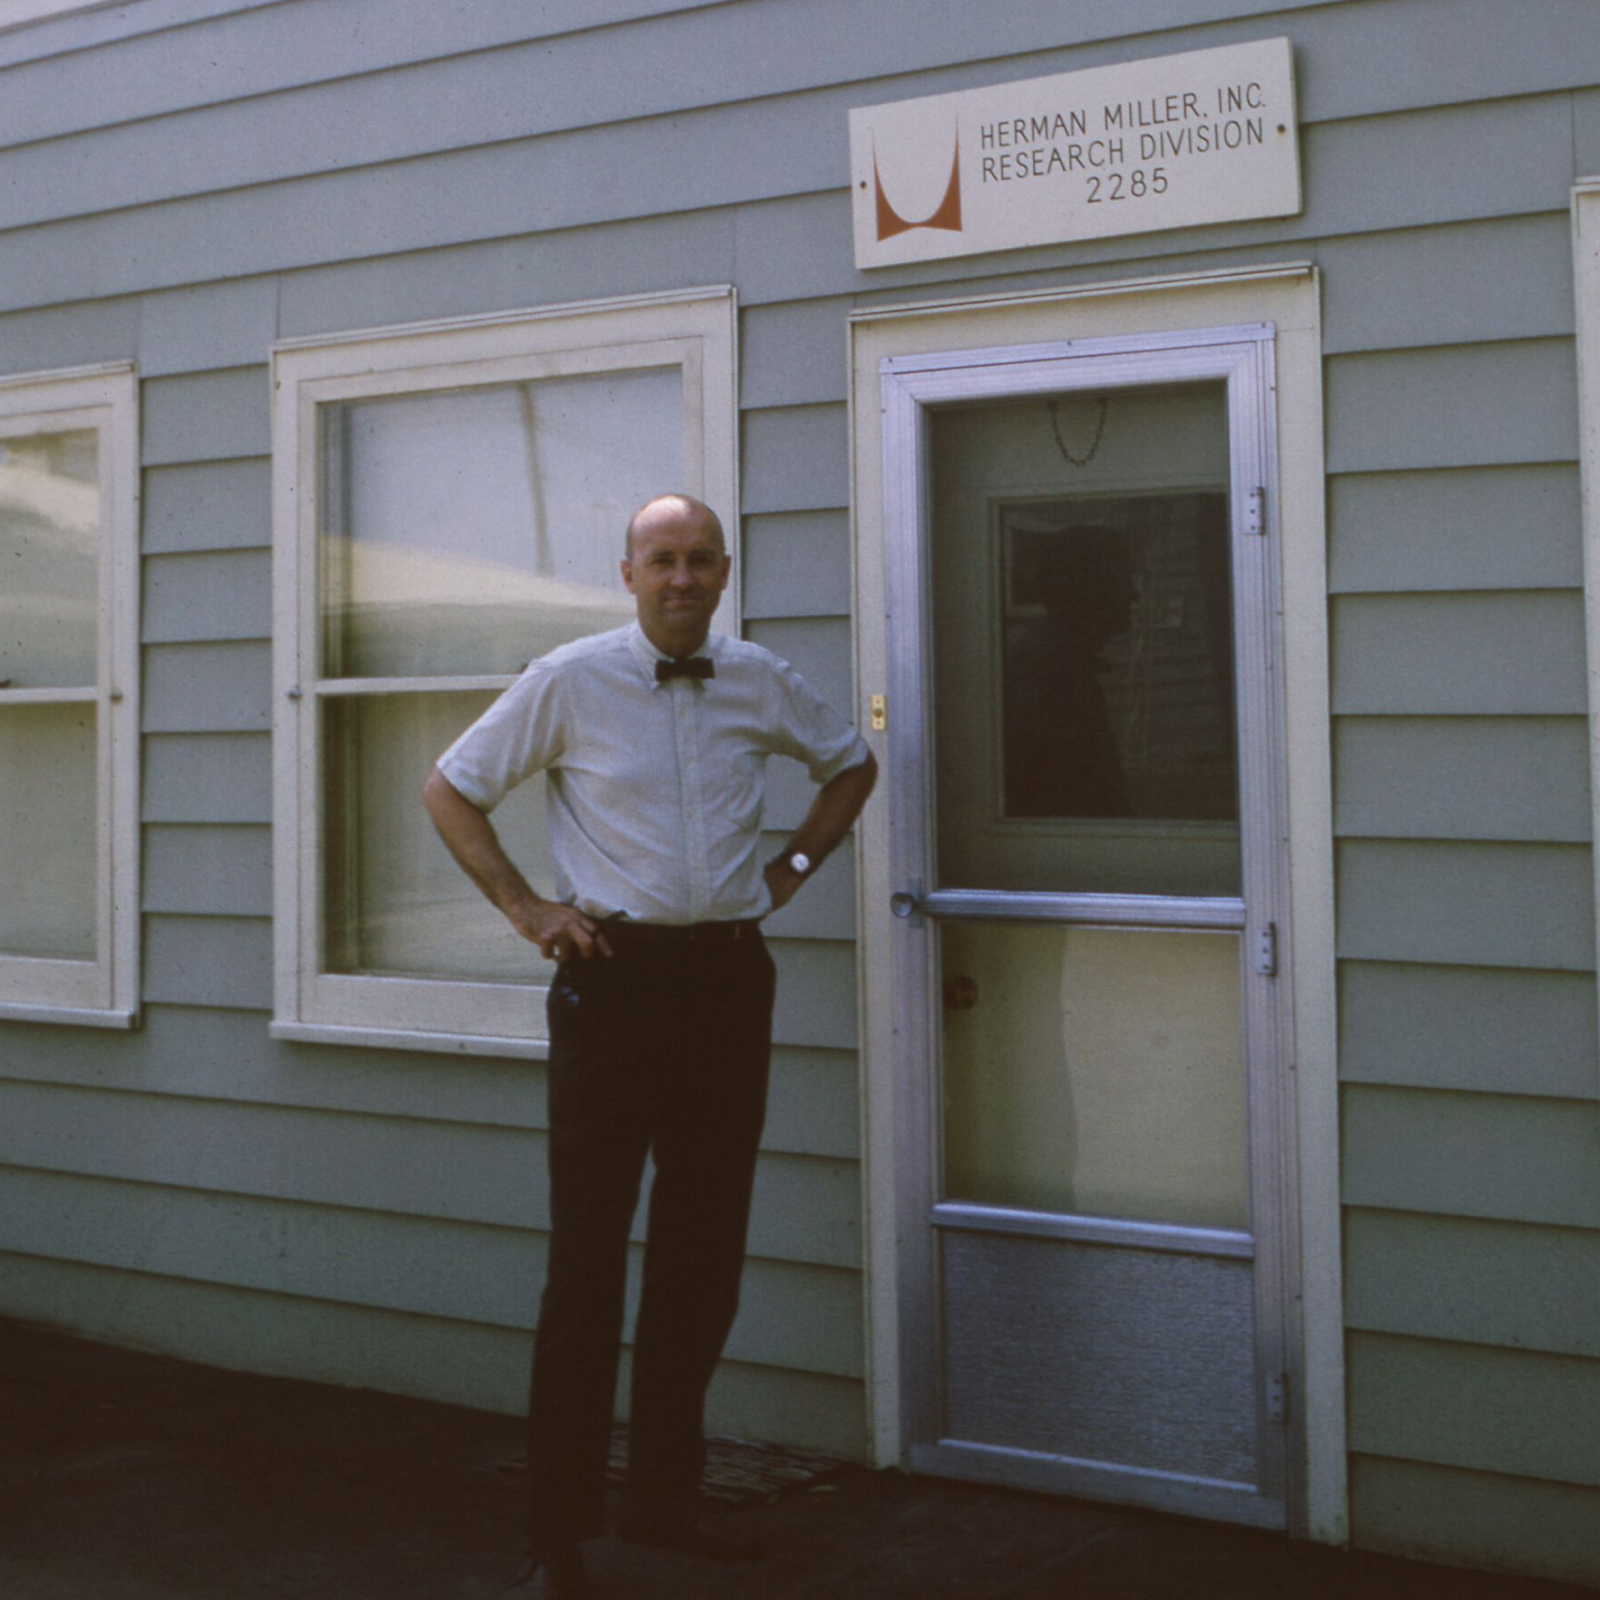 Propst standing outside in front of a building with light blue siding, two windows with white frames, a screen door with white frame, and white sign with Herman Miller red logo and black lettering that reads 'Herman Miller, Inc. Research Division, 2285.'